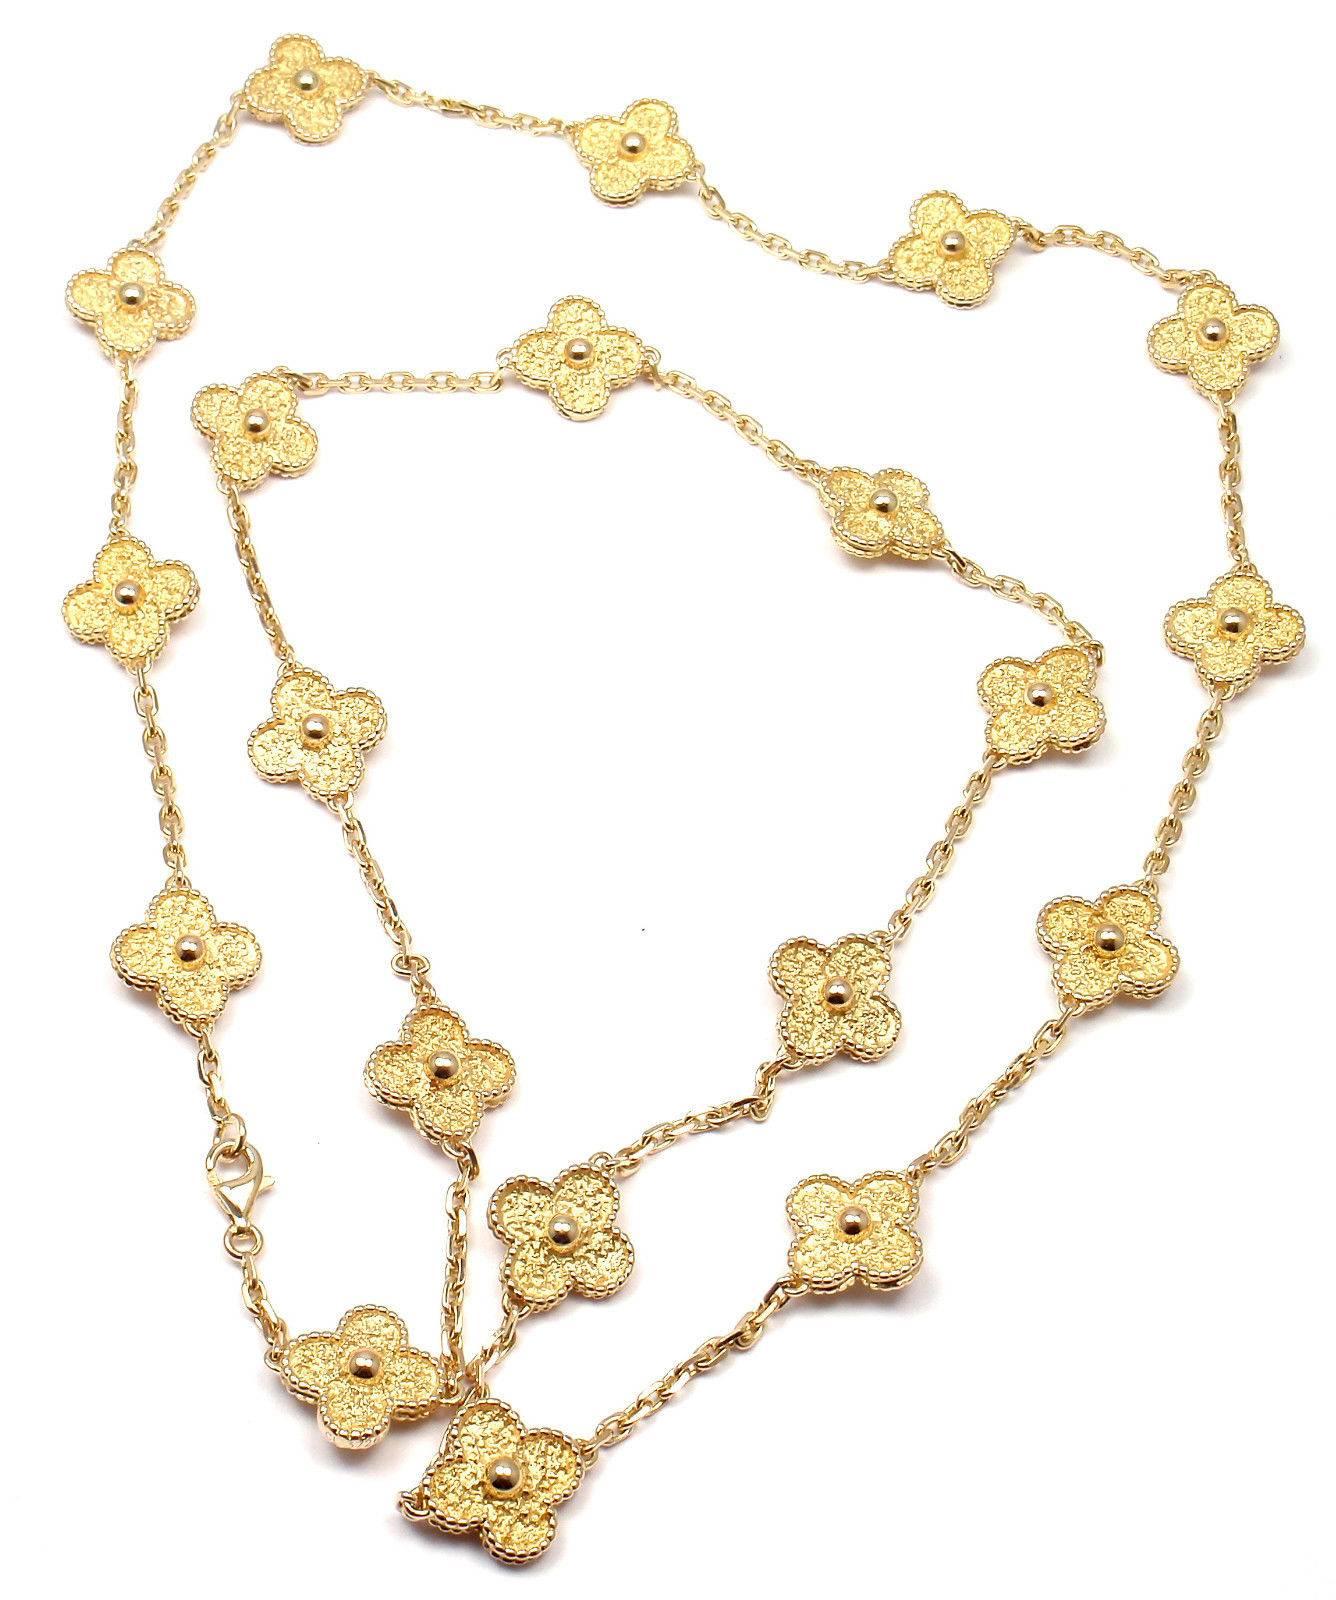 18k Yellow Gold Alhambra 20 Motif Necklace by Van Cleef & Arpels. 

Details: 
Length: 32.5